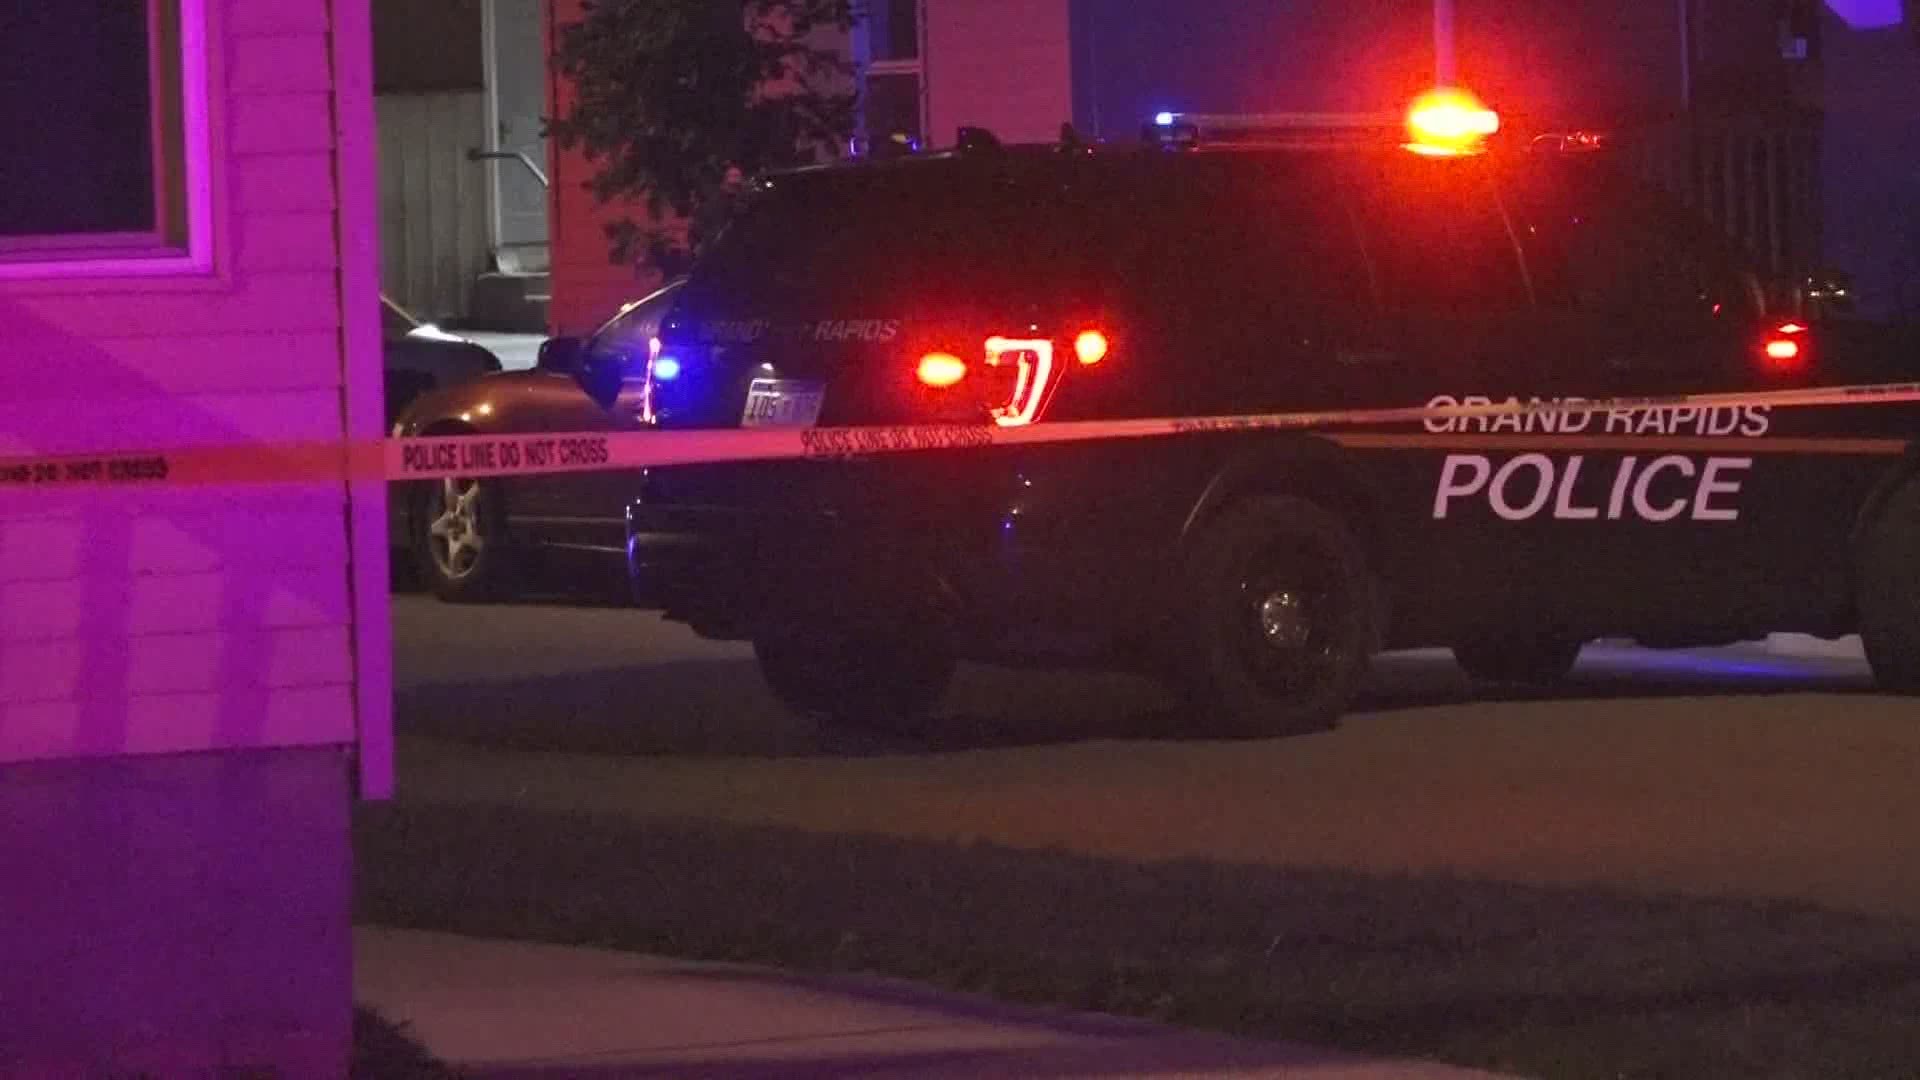 1 shot in the arm overnight on Grand Rapids' northwest side